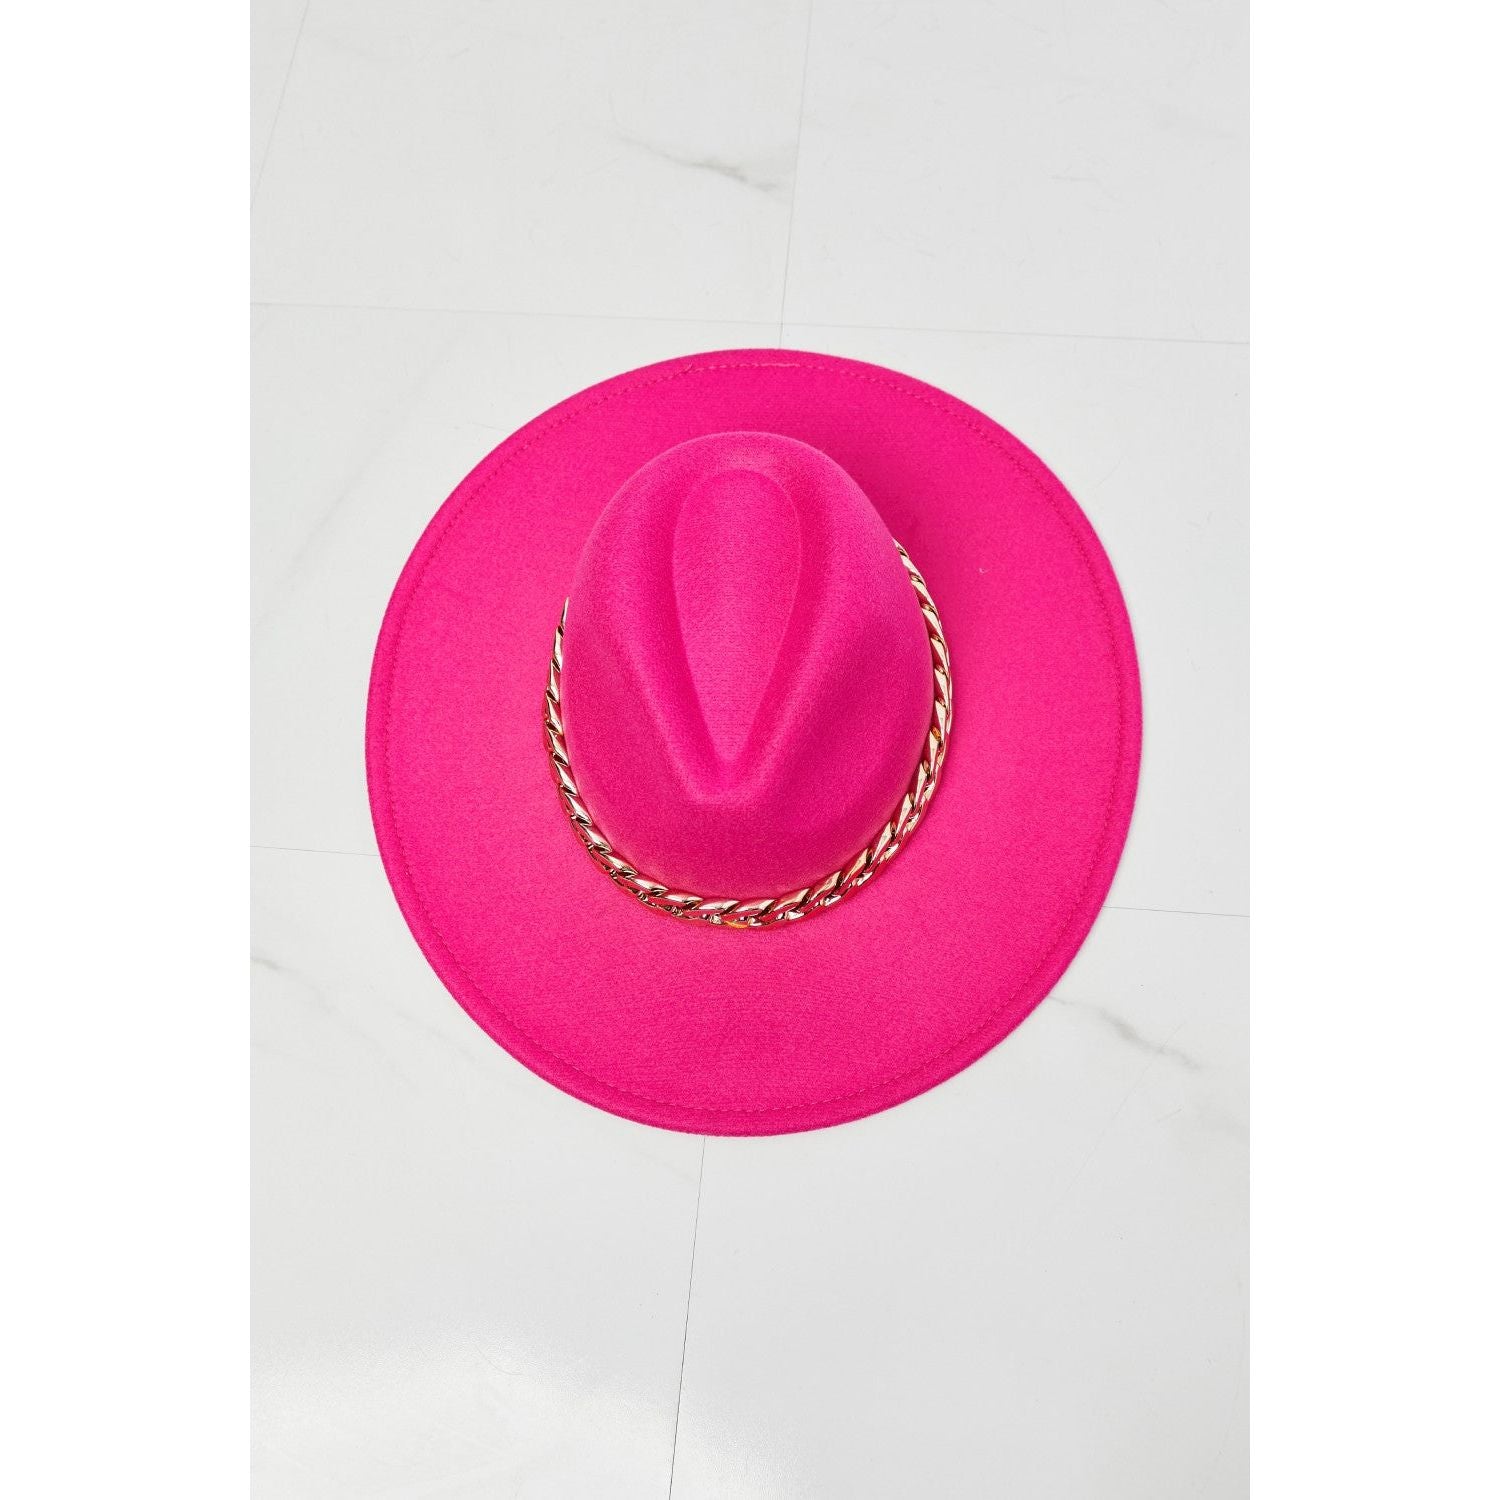 Fame Keep Your Promise Fedora Hat in Pink - TiffanyzKlozet